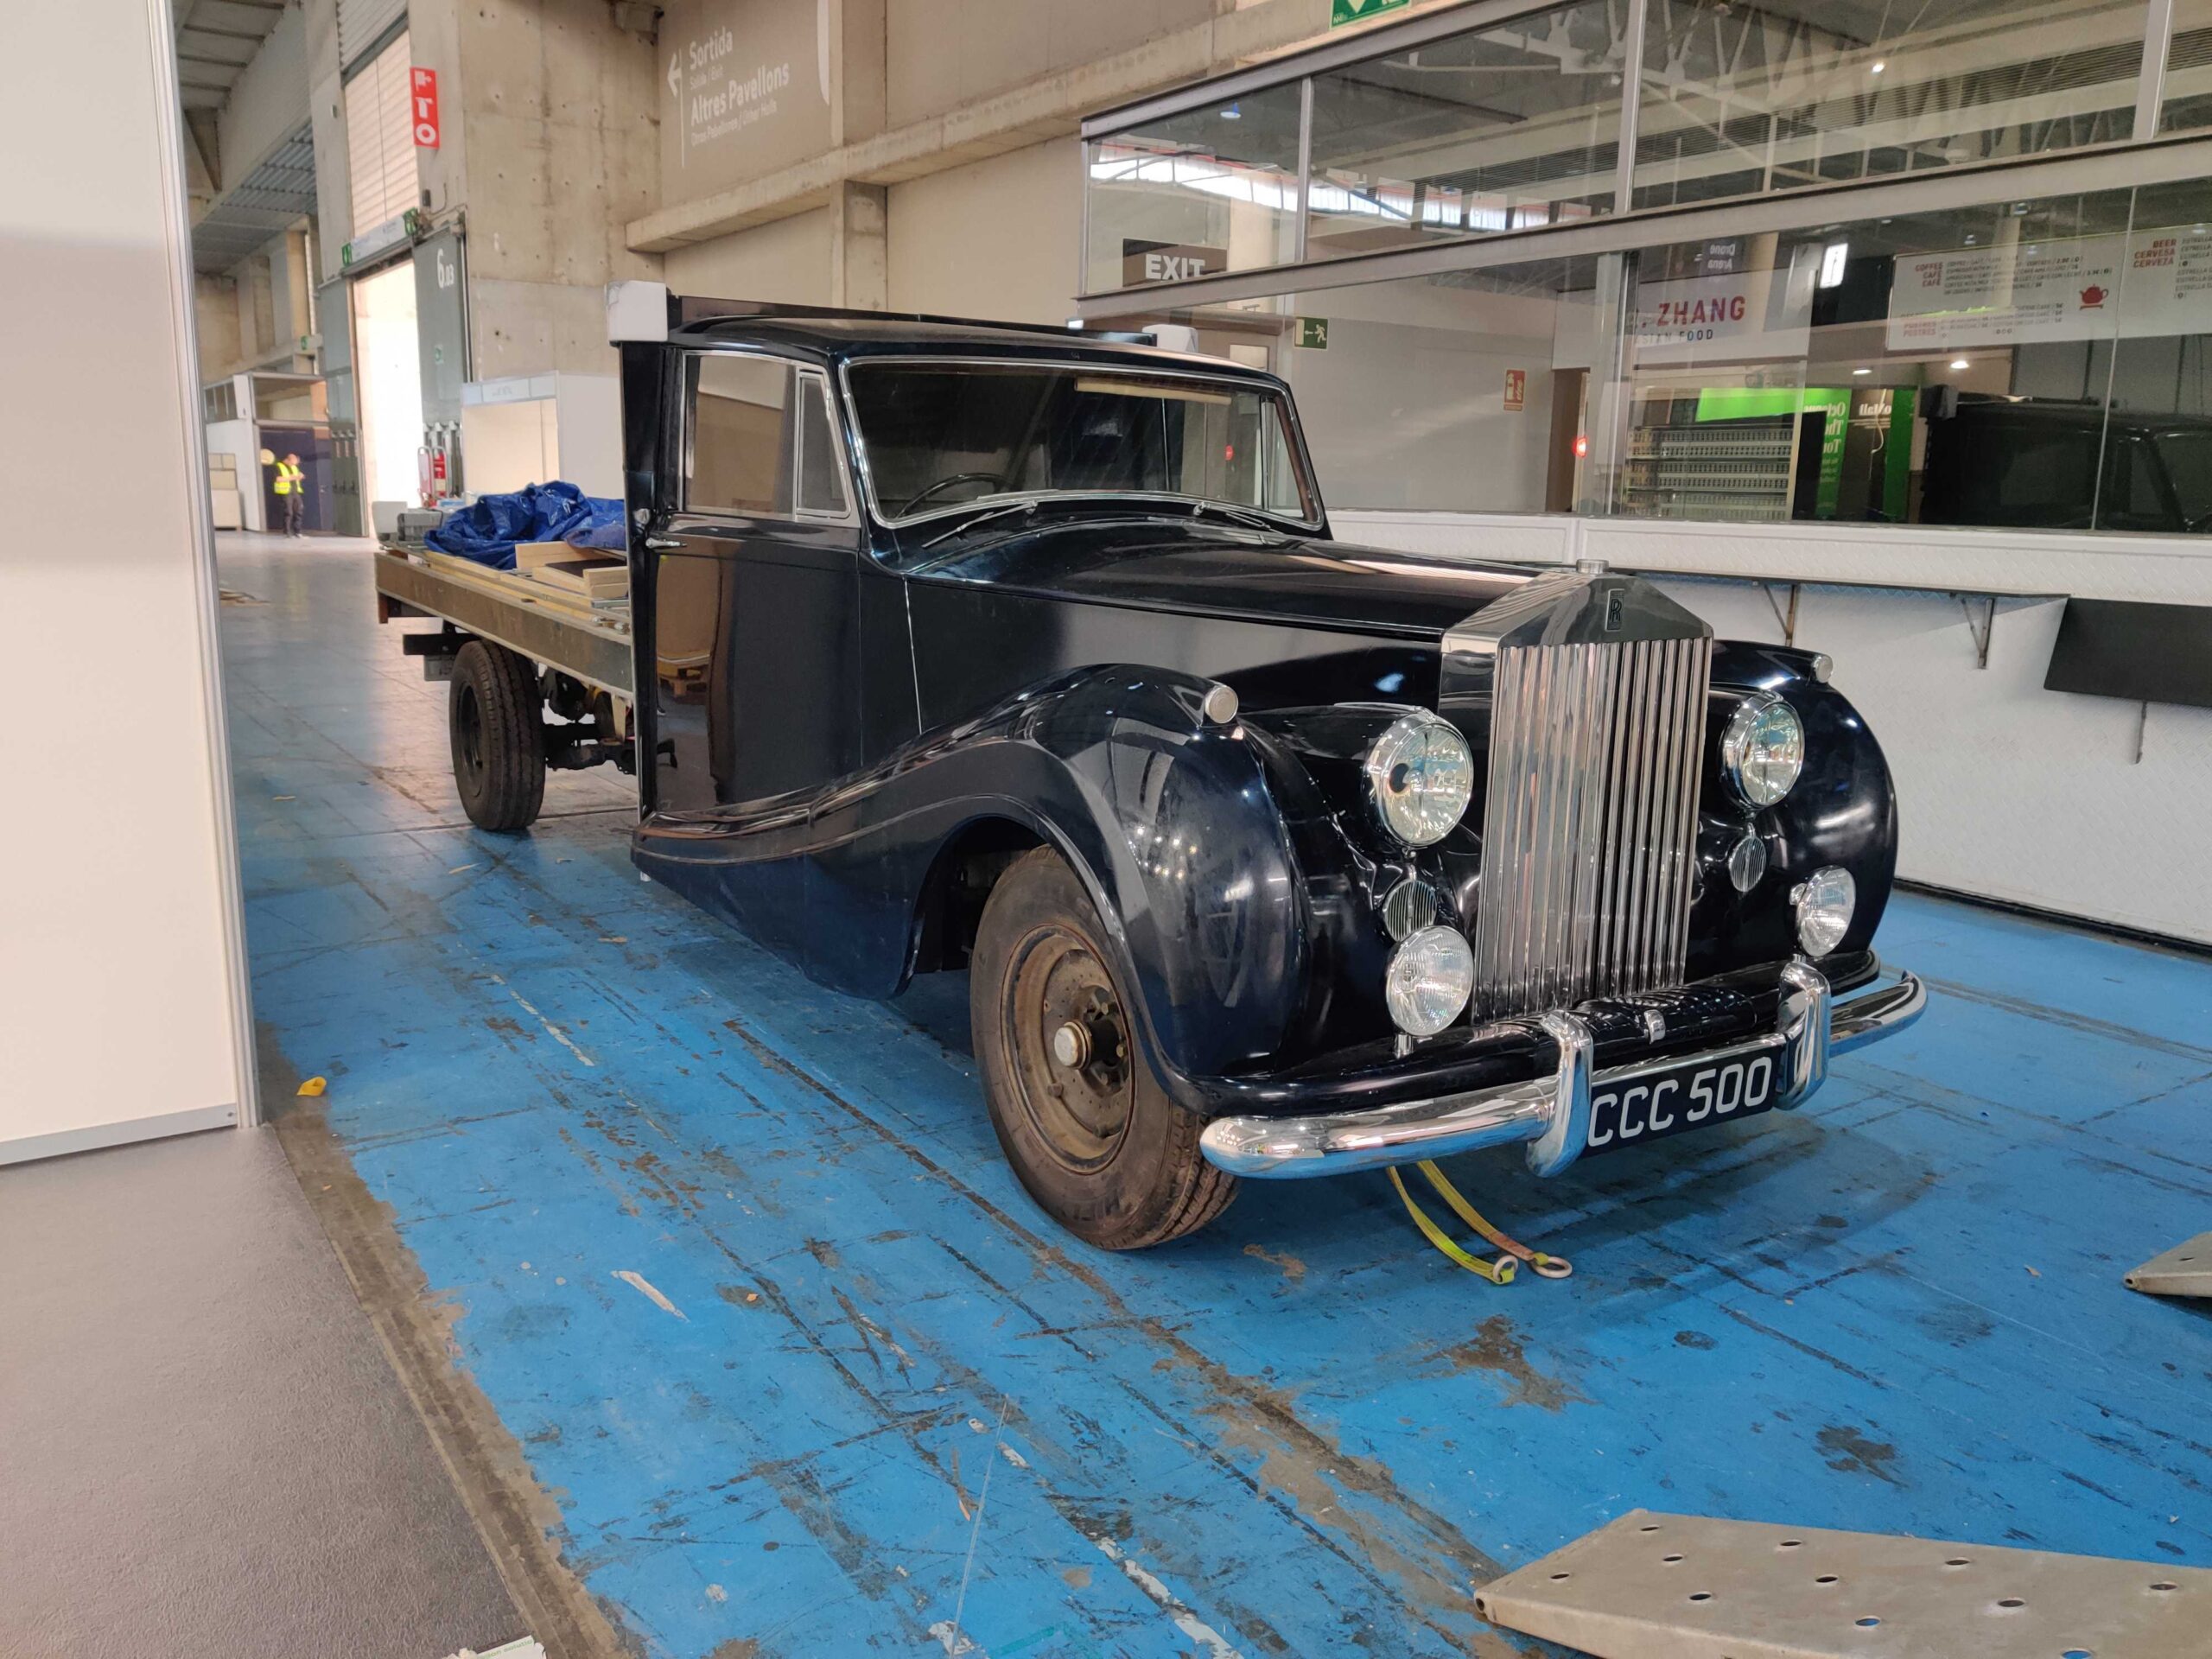 The Making of the Rolls Royce Digital Signage Car